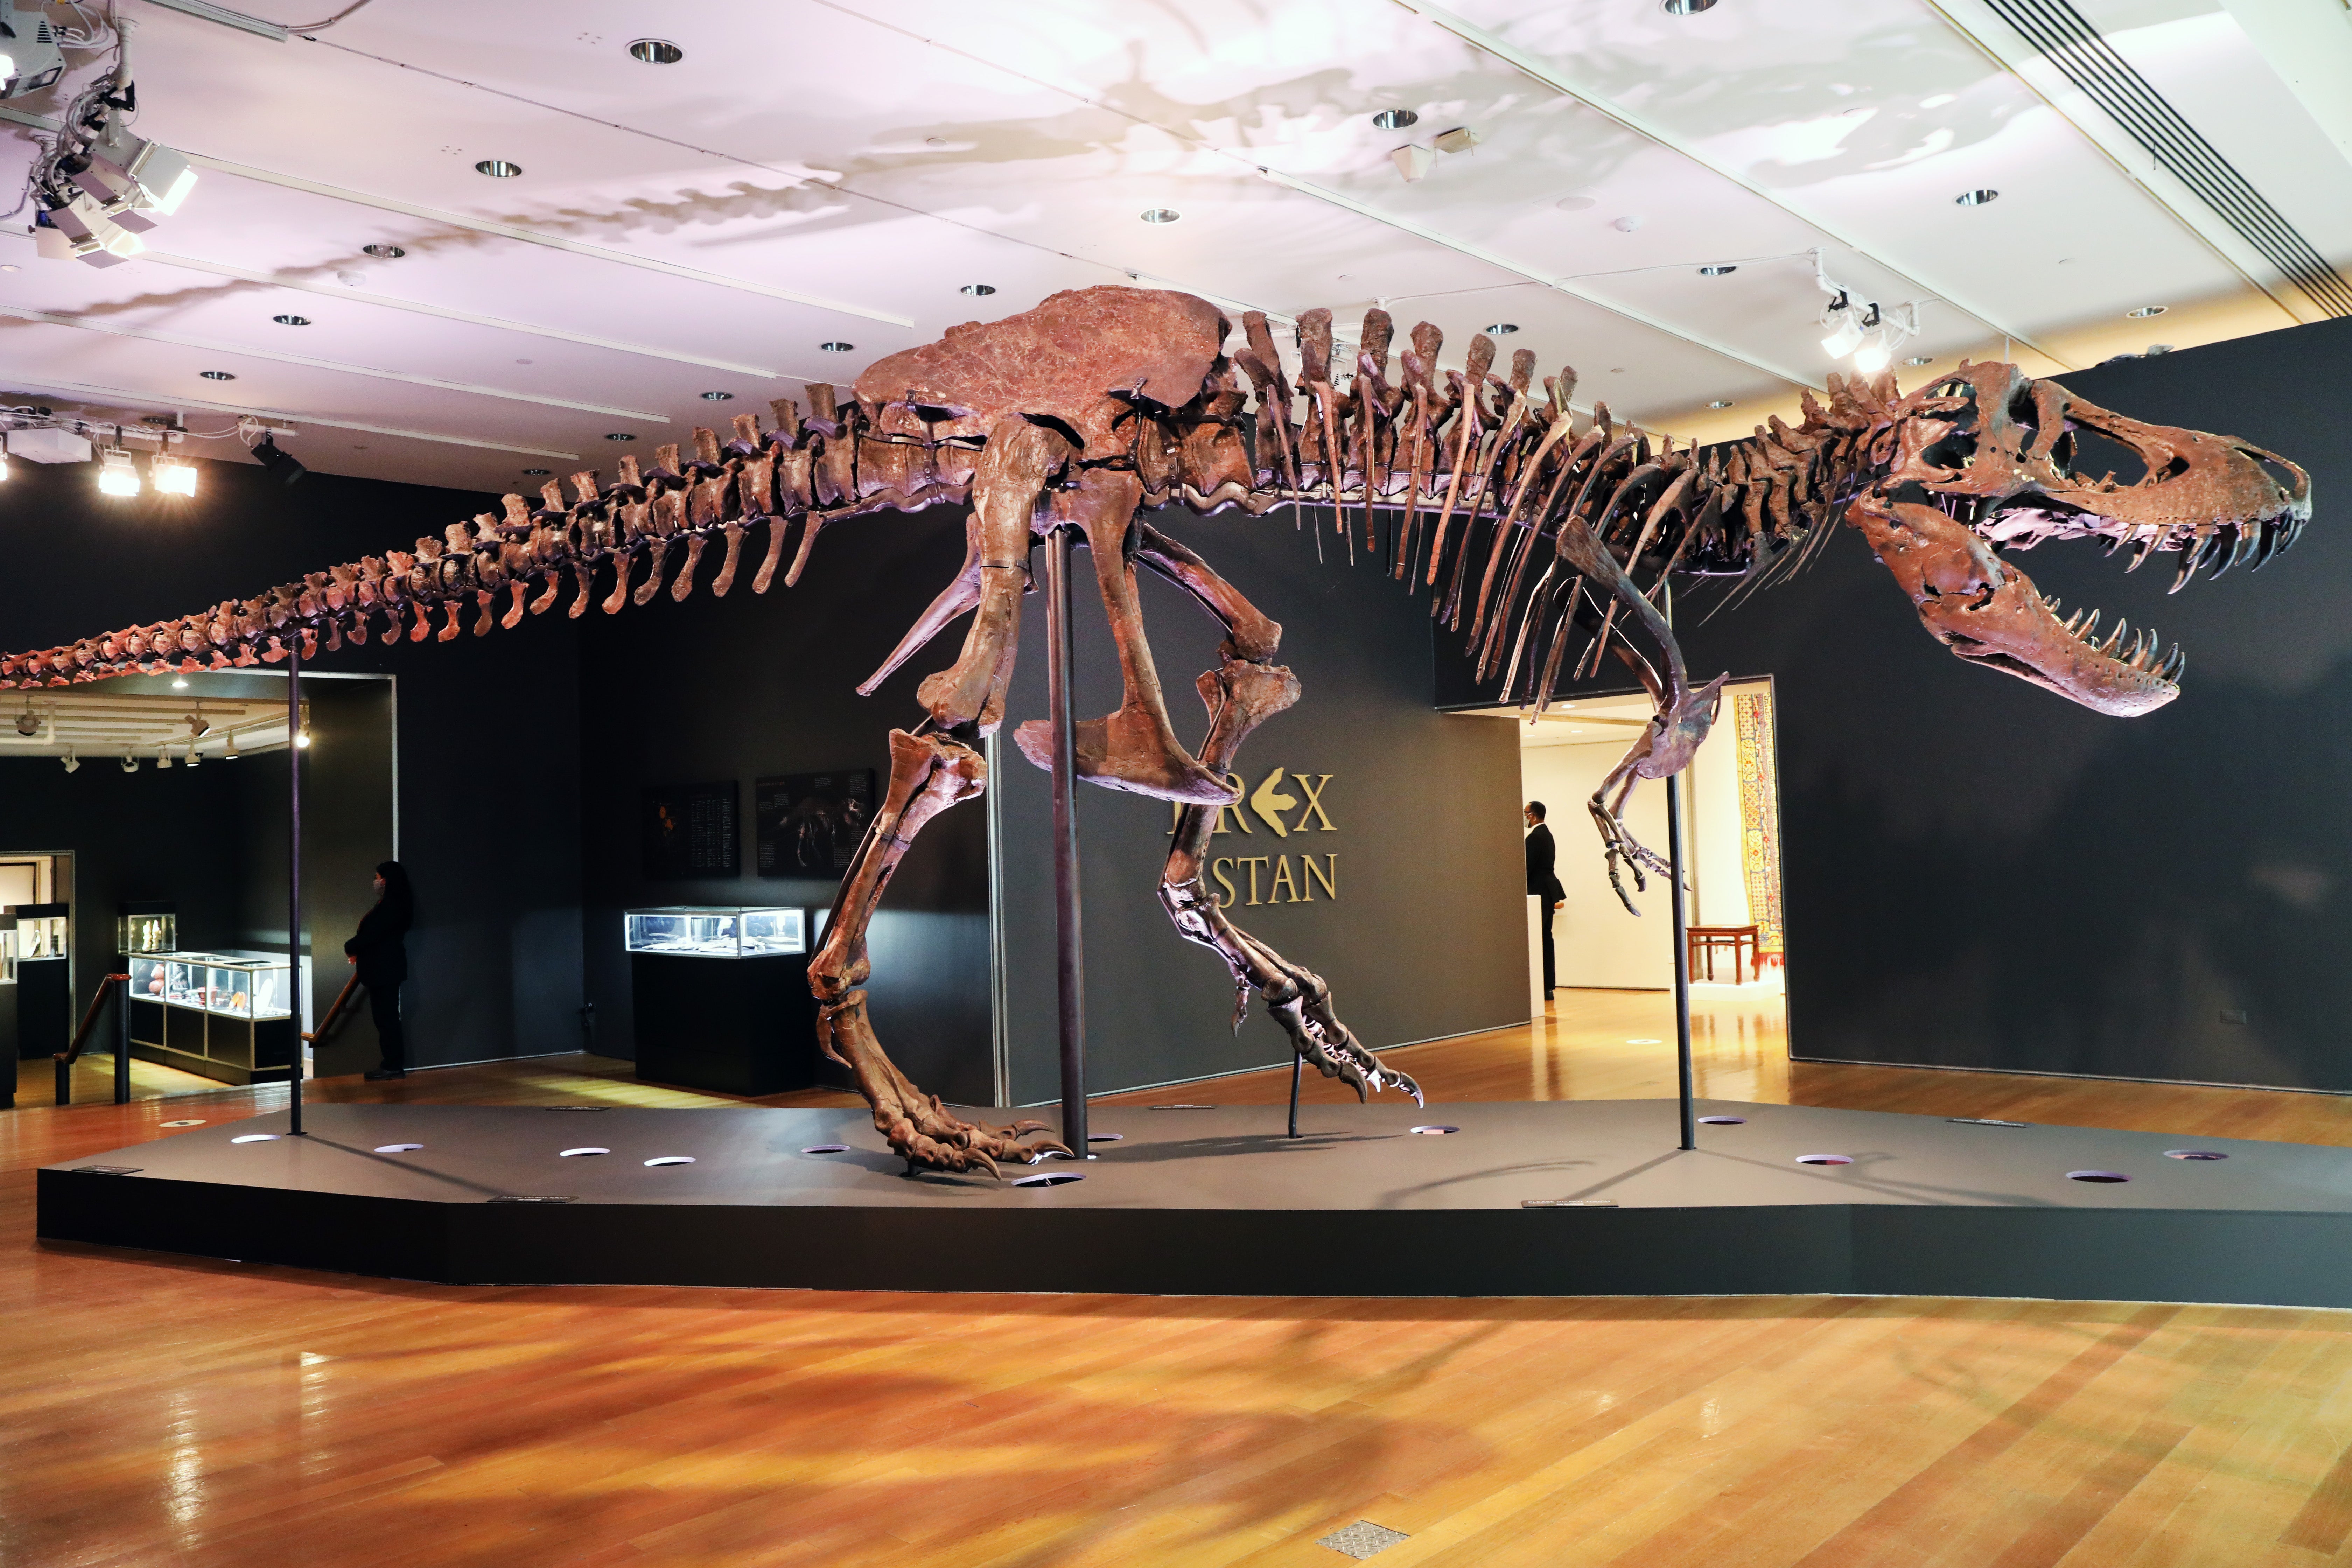 Tyrannosaurus Rex dinosaur fossil skeleton is displayed in a gallery at Christie’s auction house on September 17, 2020 in New York City